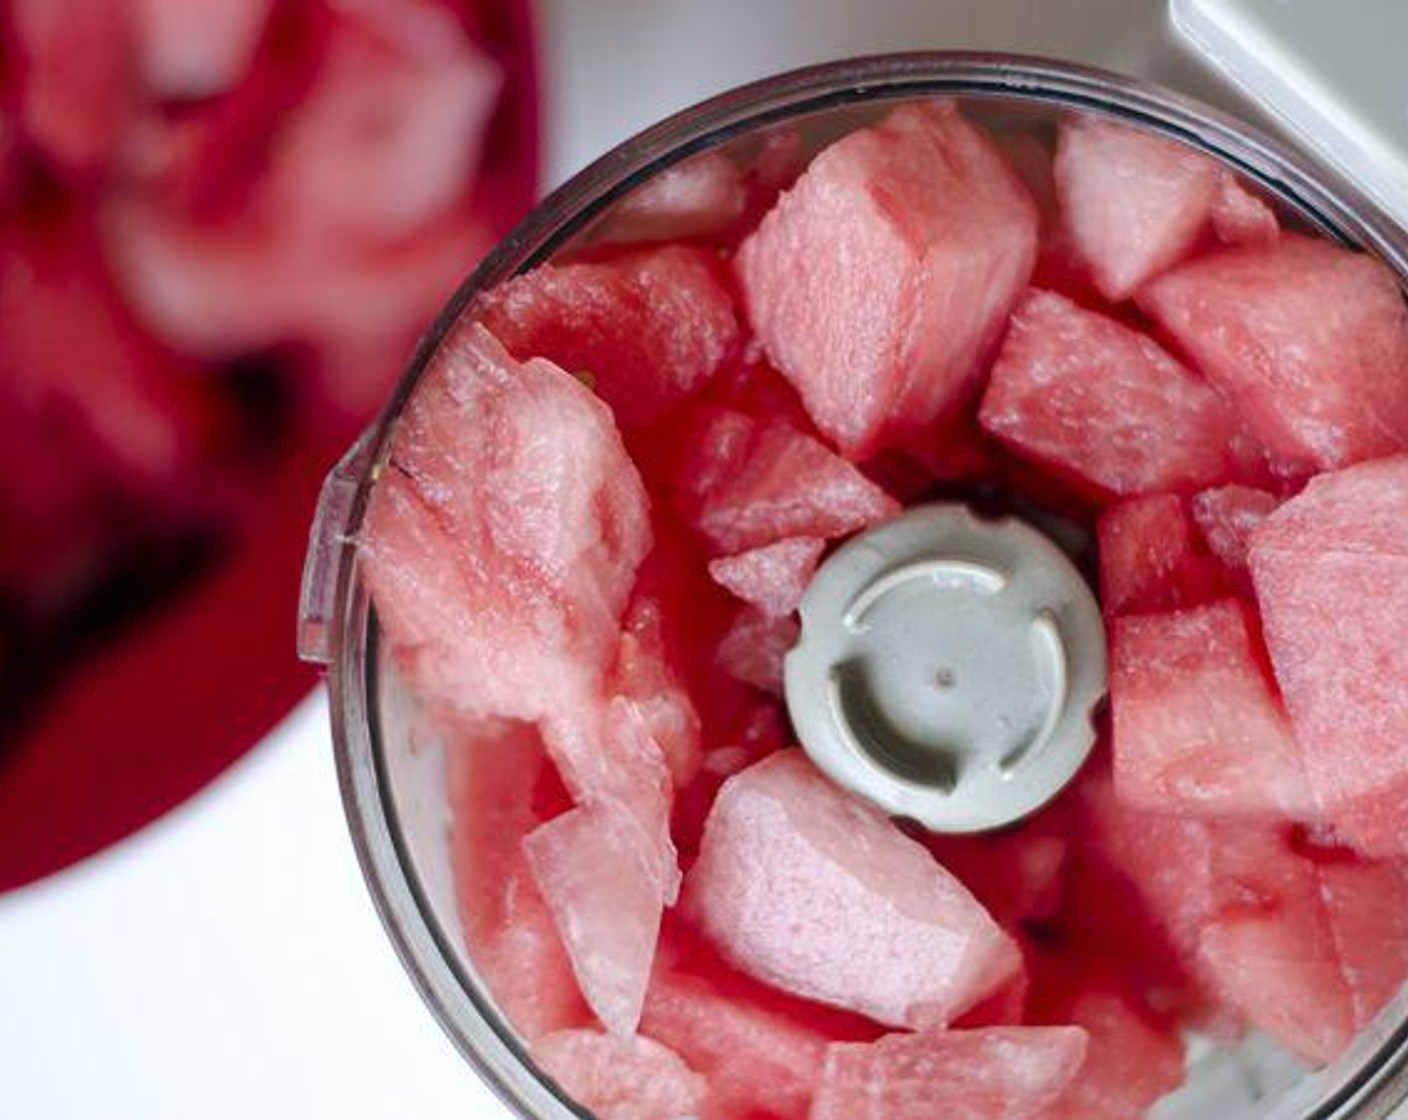 step 1 Scoop out the fruit of the Seedless Watermelon (1/4). In a blender or food processor, puree watermelon until it reaches a thin, even consistency. If you have seeds in your watermelon, strain them out in a mesh colander right about now.